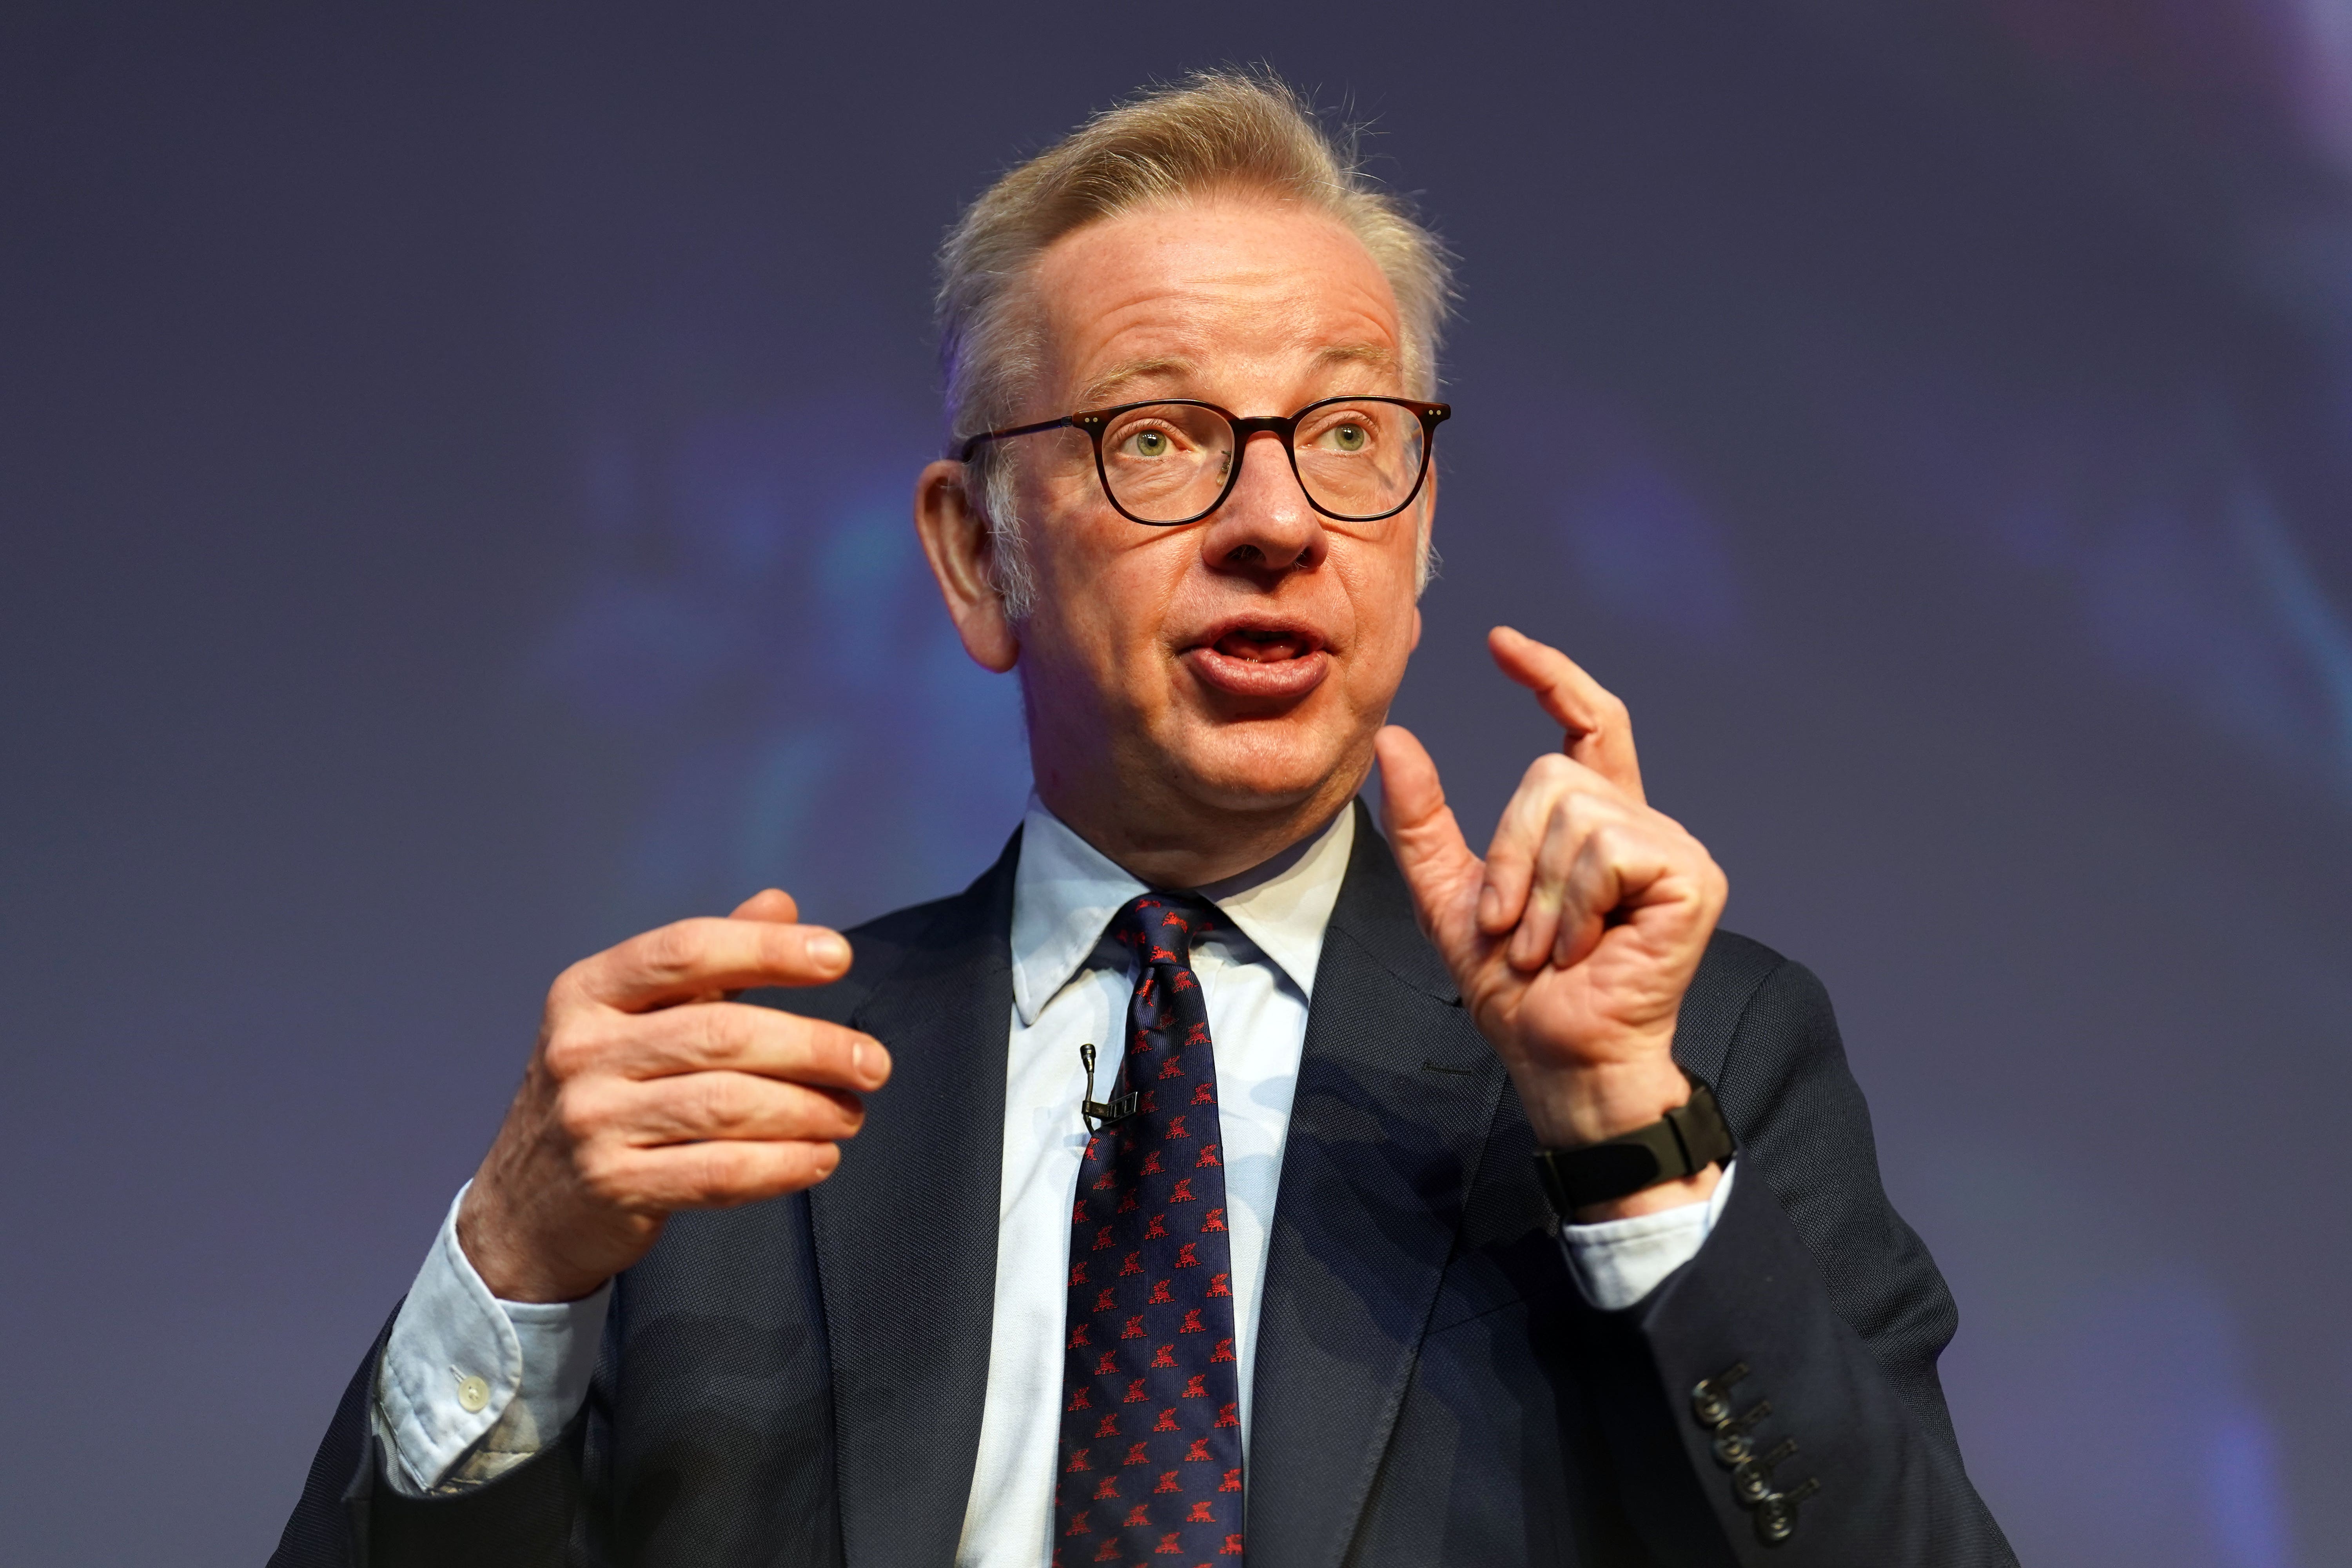 Housing secretary Michael Gove defended the government’s climbdown on housing targets last year